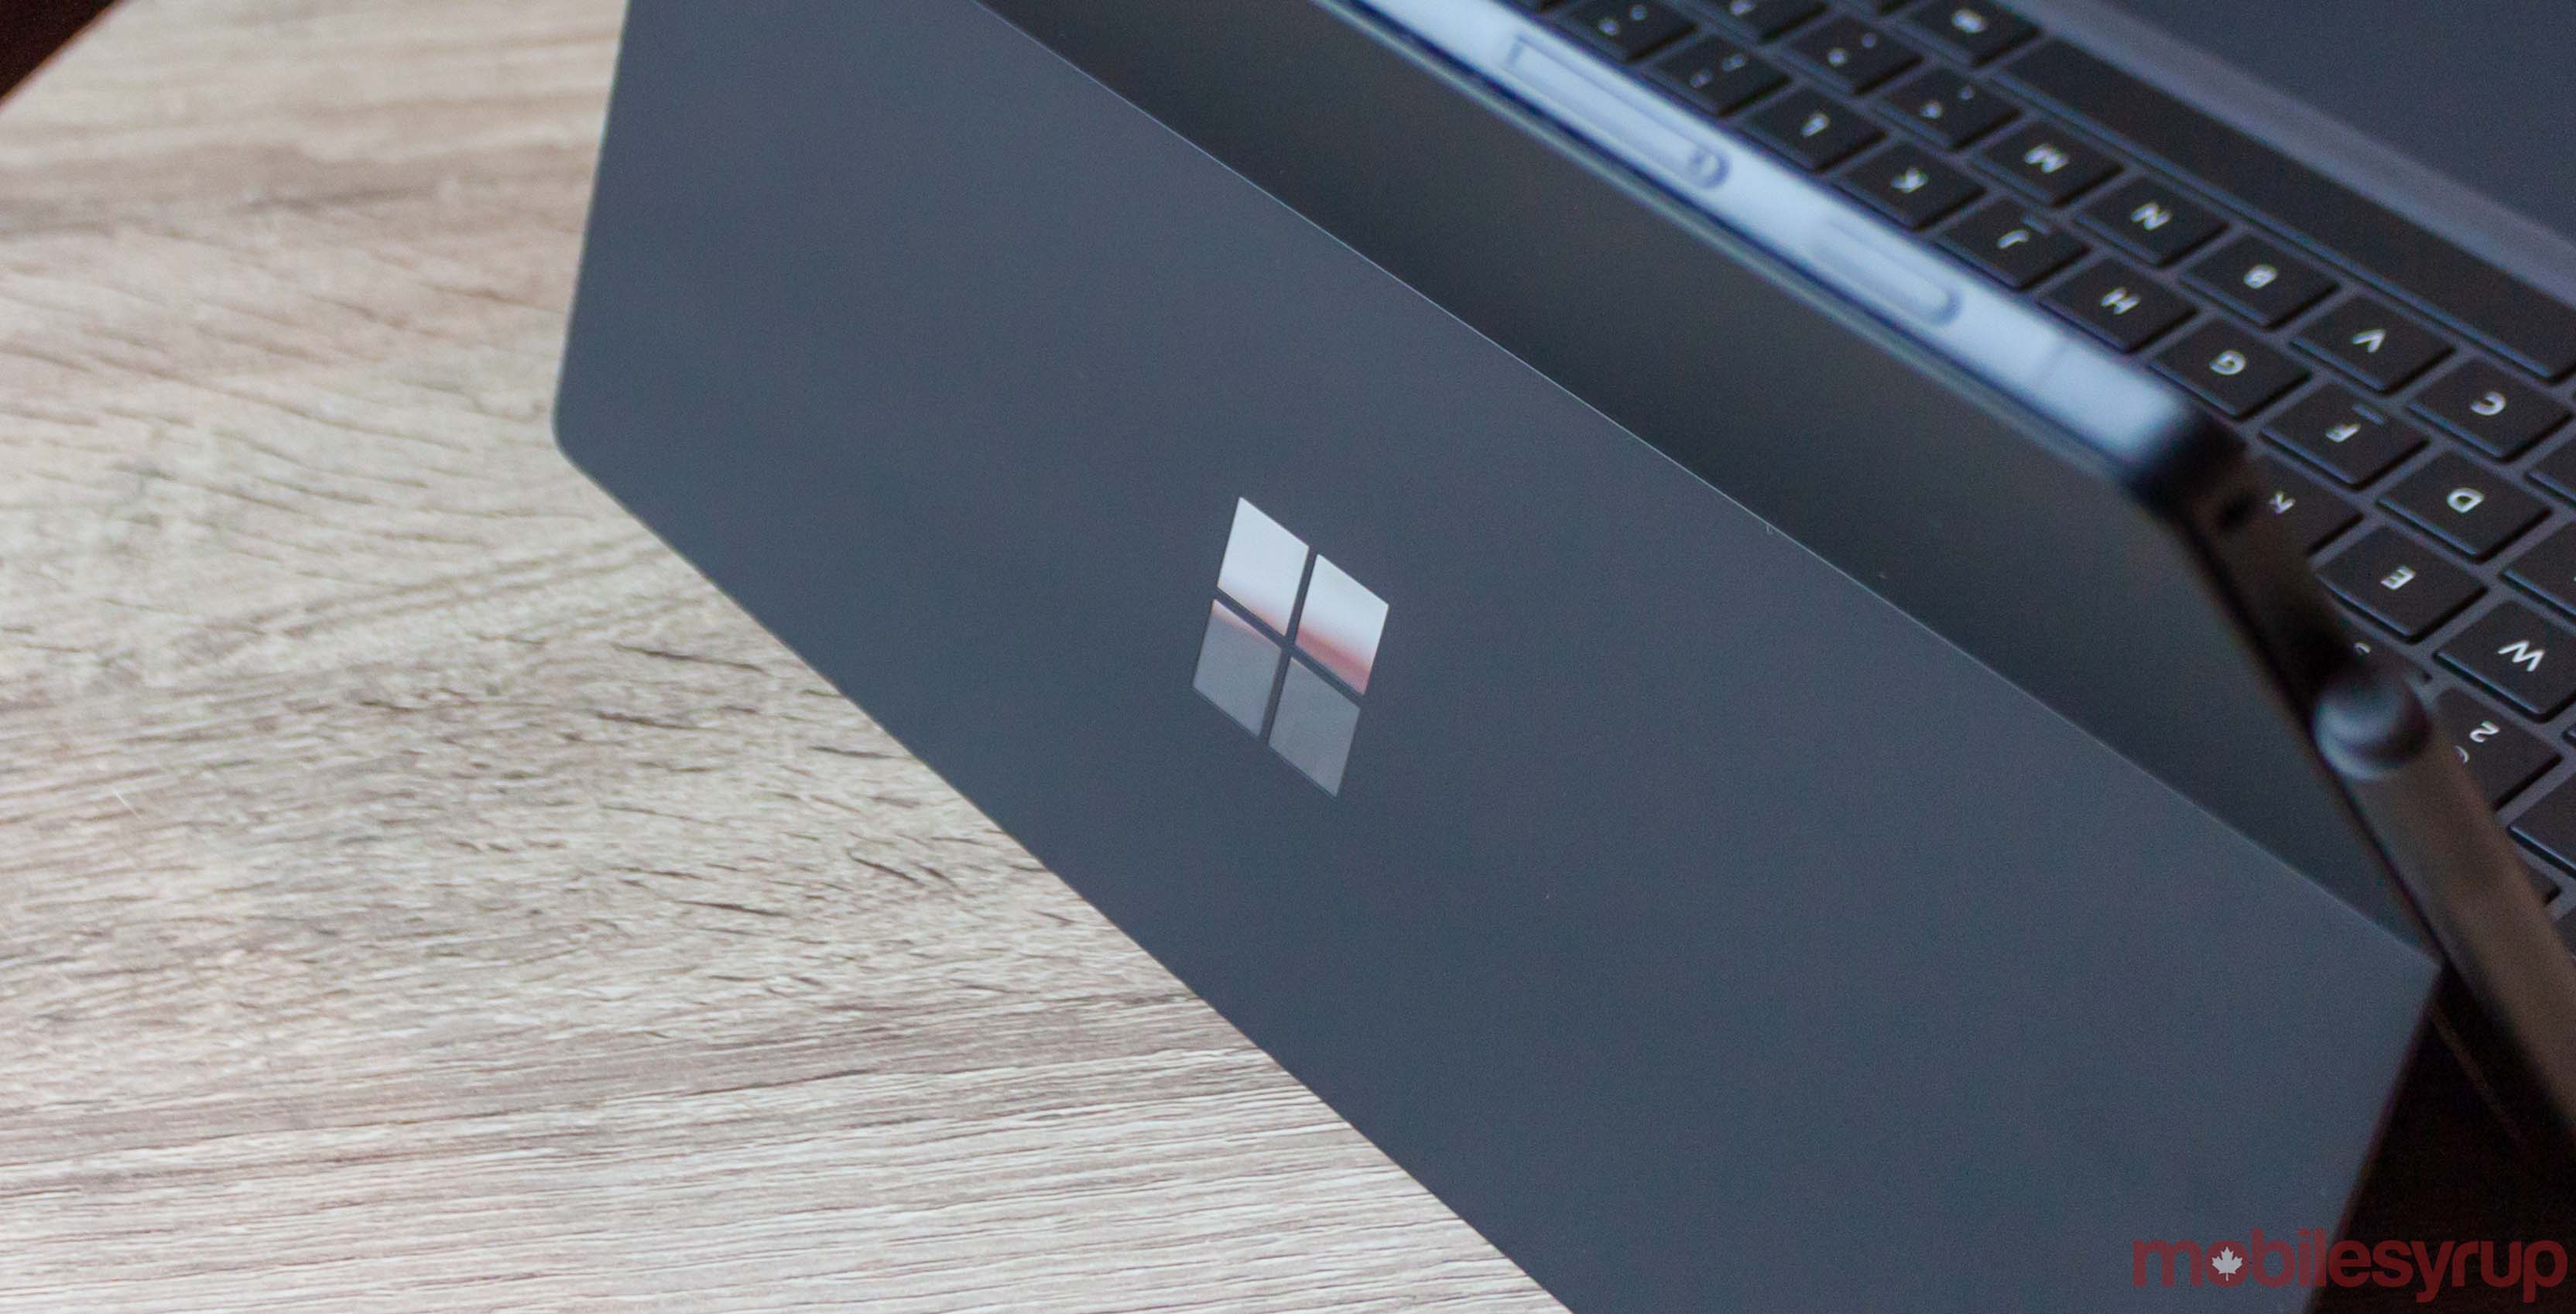 Microsoft Surface Book Logo - New book lays out Microsoft's Surface plans for 2019, 2020